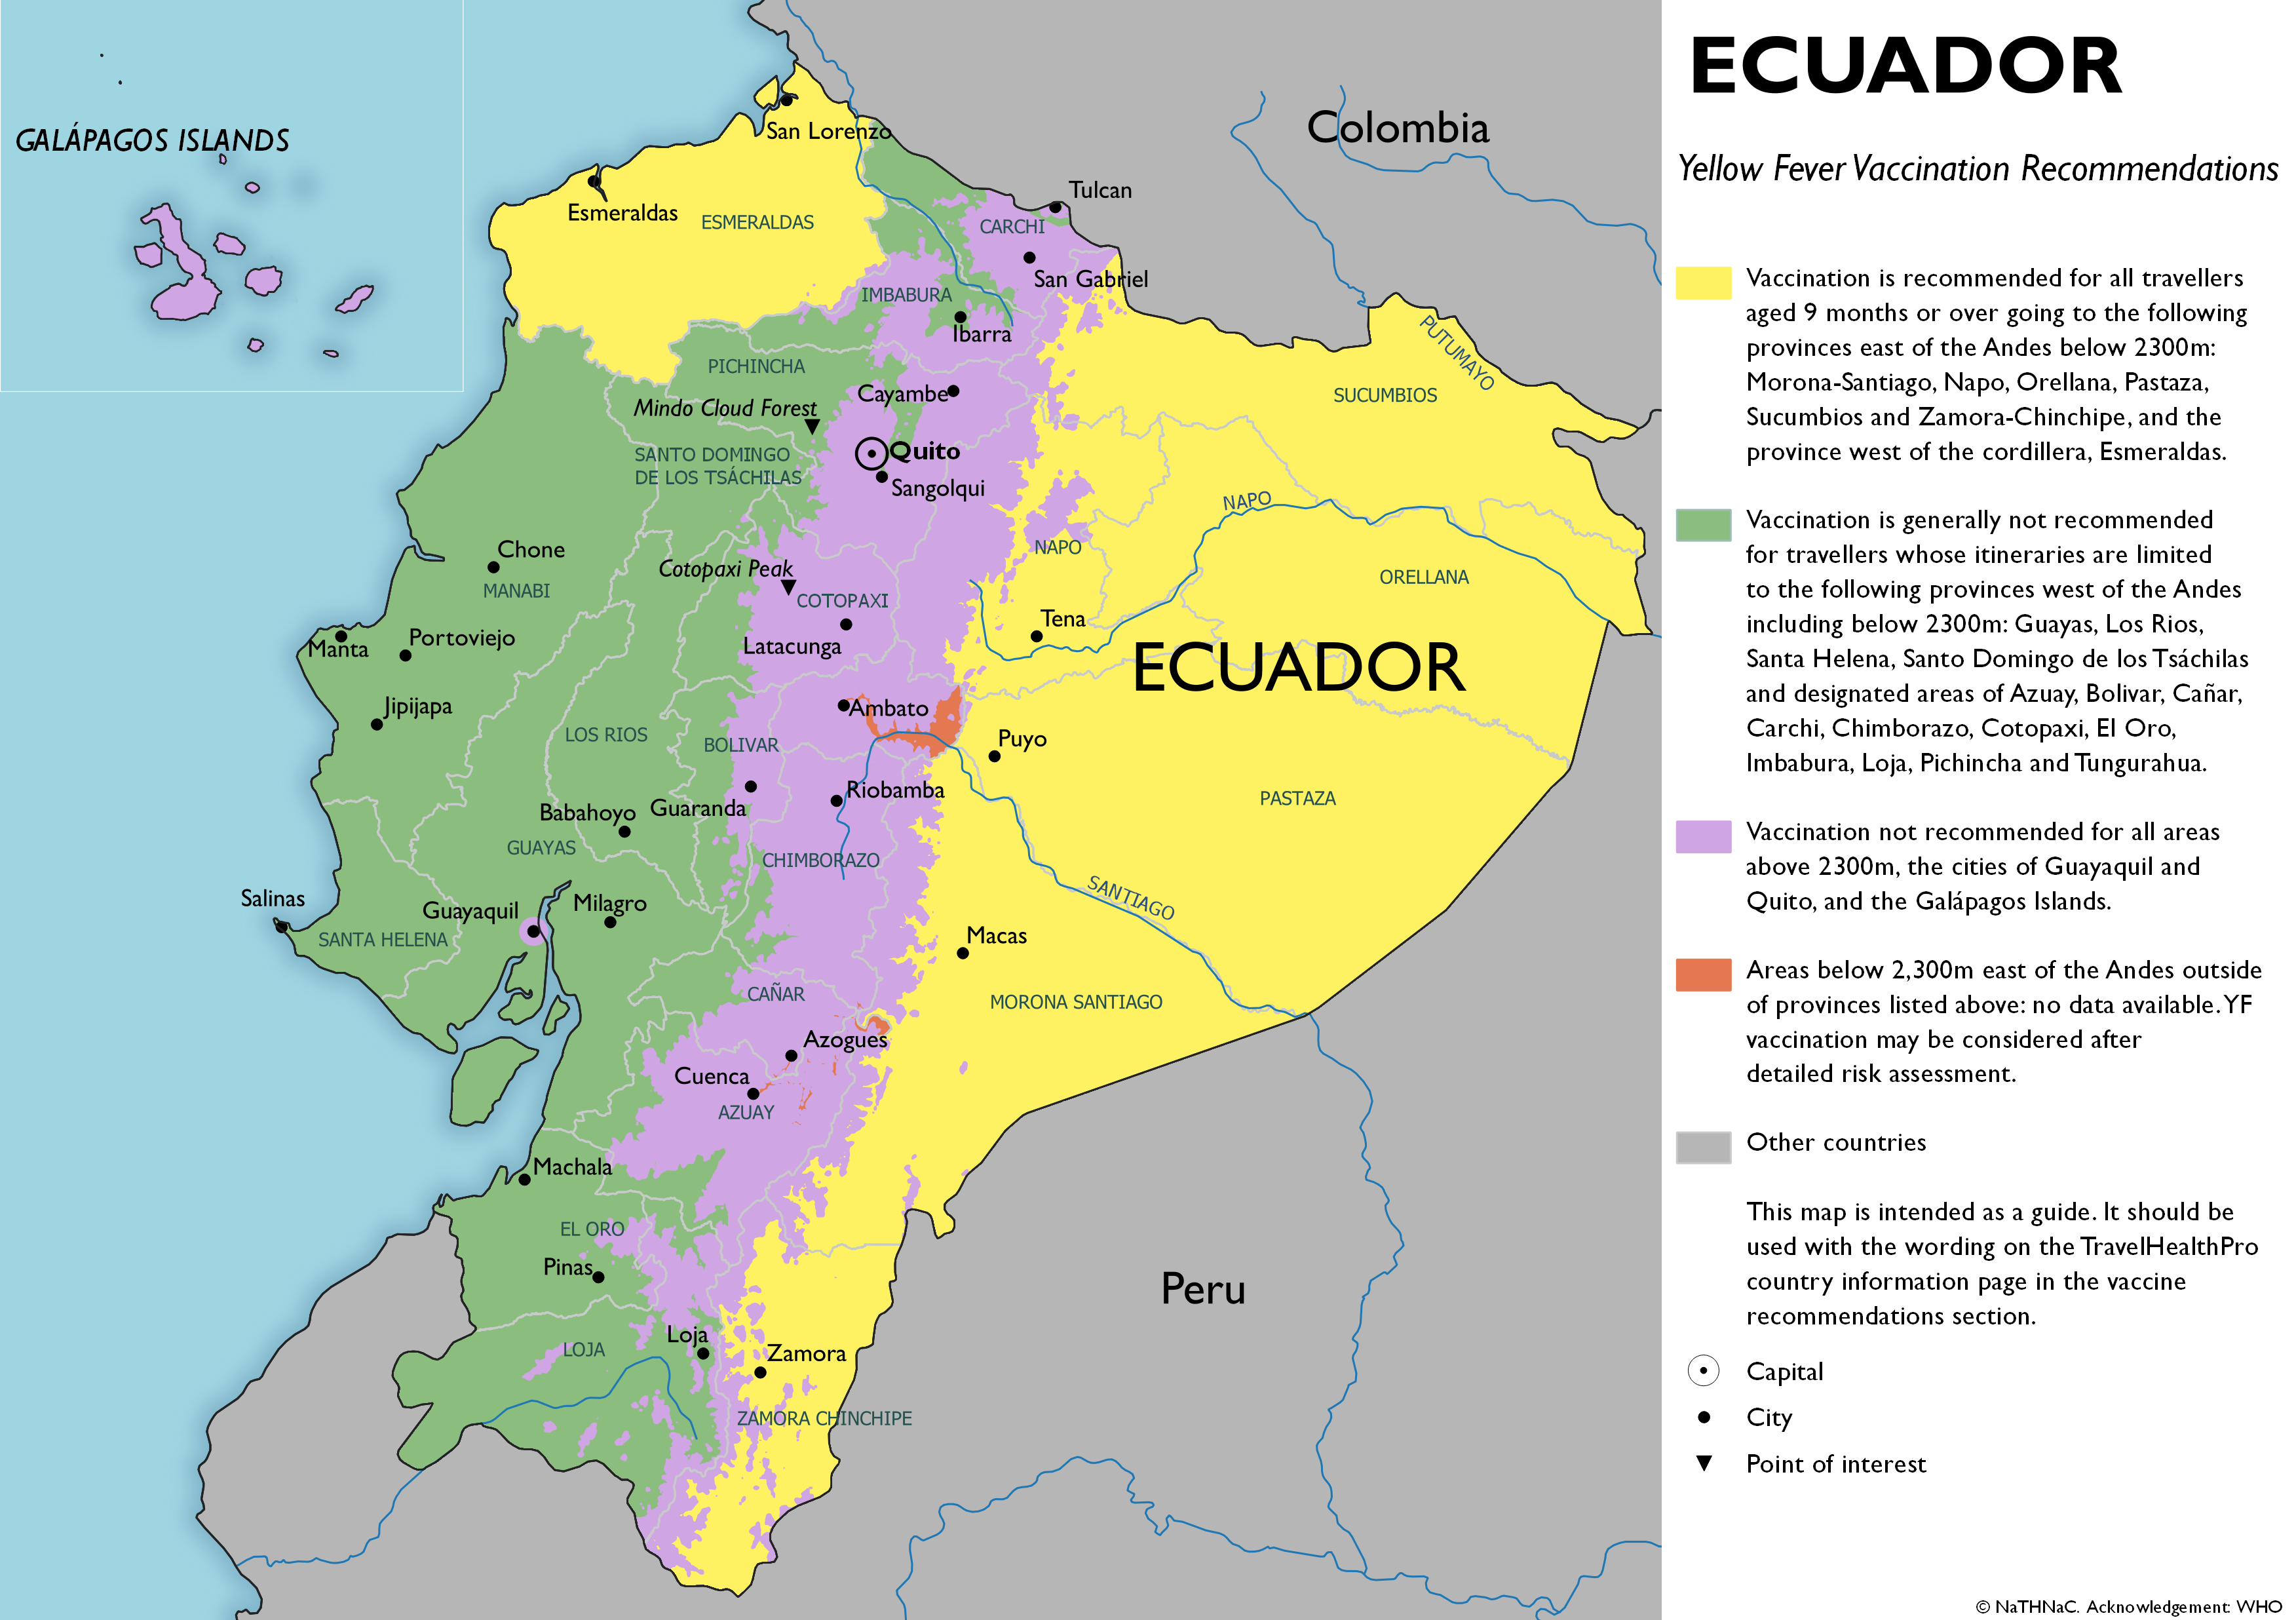 Yellow fever vaccine recommendation map for Ecuador